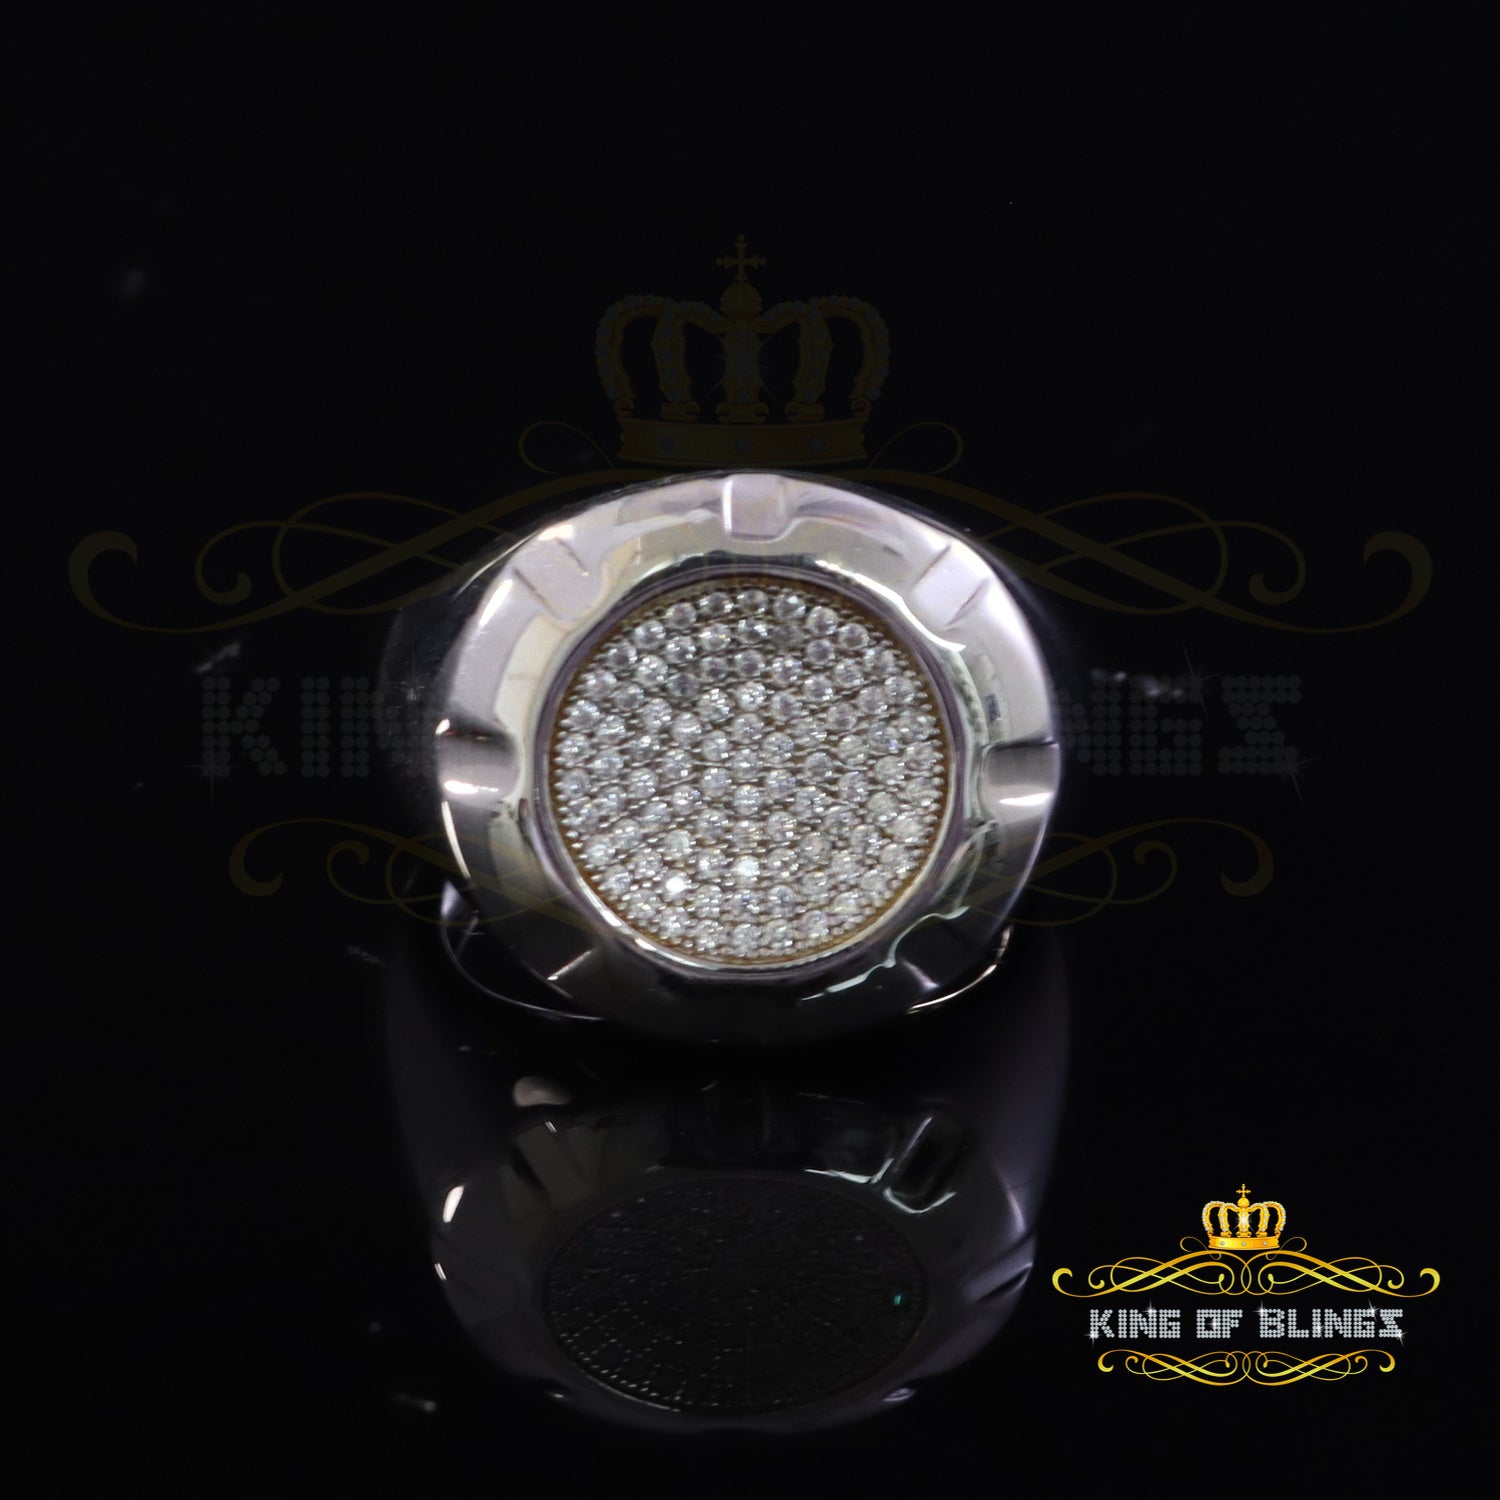 925 Sterling White Silver 1.10ct Cubic Zirconia Round Fashion Men's Ring Size 9 KING OF BLINGS